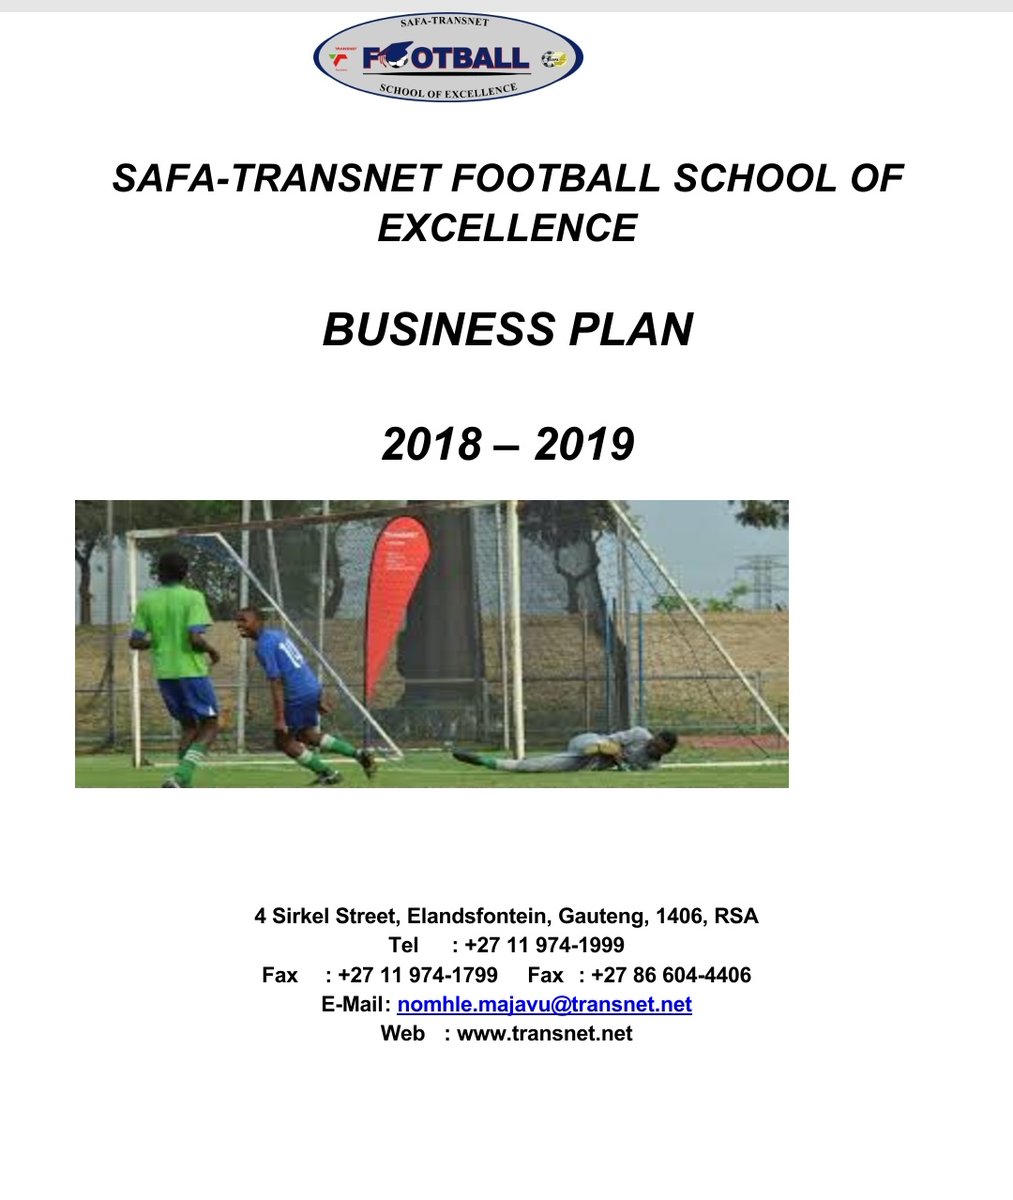 @Lesufi, we have tried to make the School of Excellence go commercial & we know the demand exists... with 5k per month for private education, accommodation, food and beverages, and too class youth football development program, we would be the cheapest in South Africa. We tried 😢